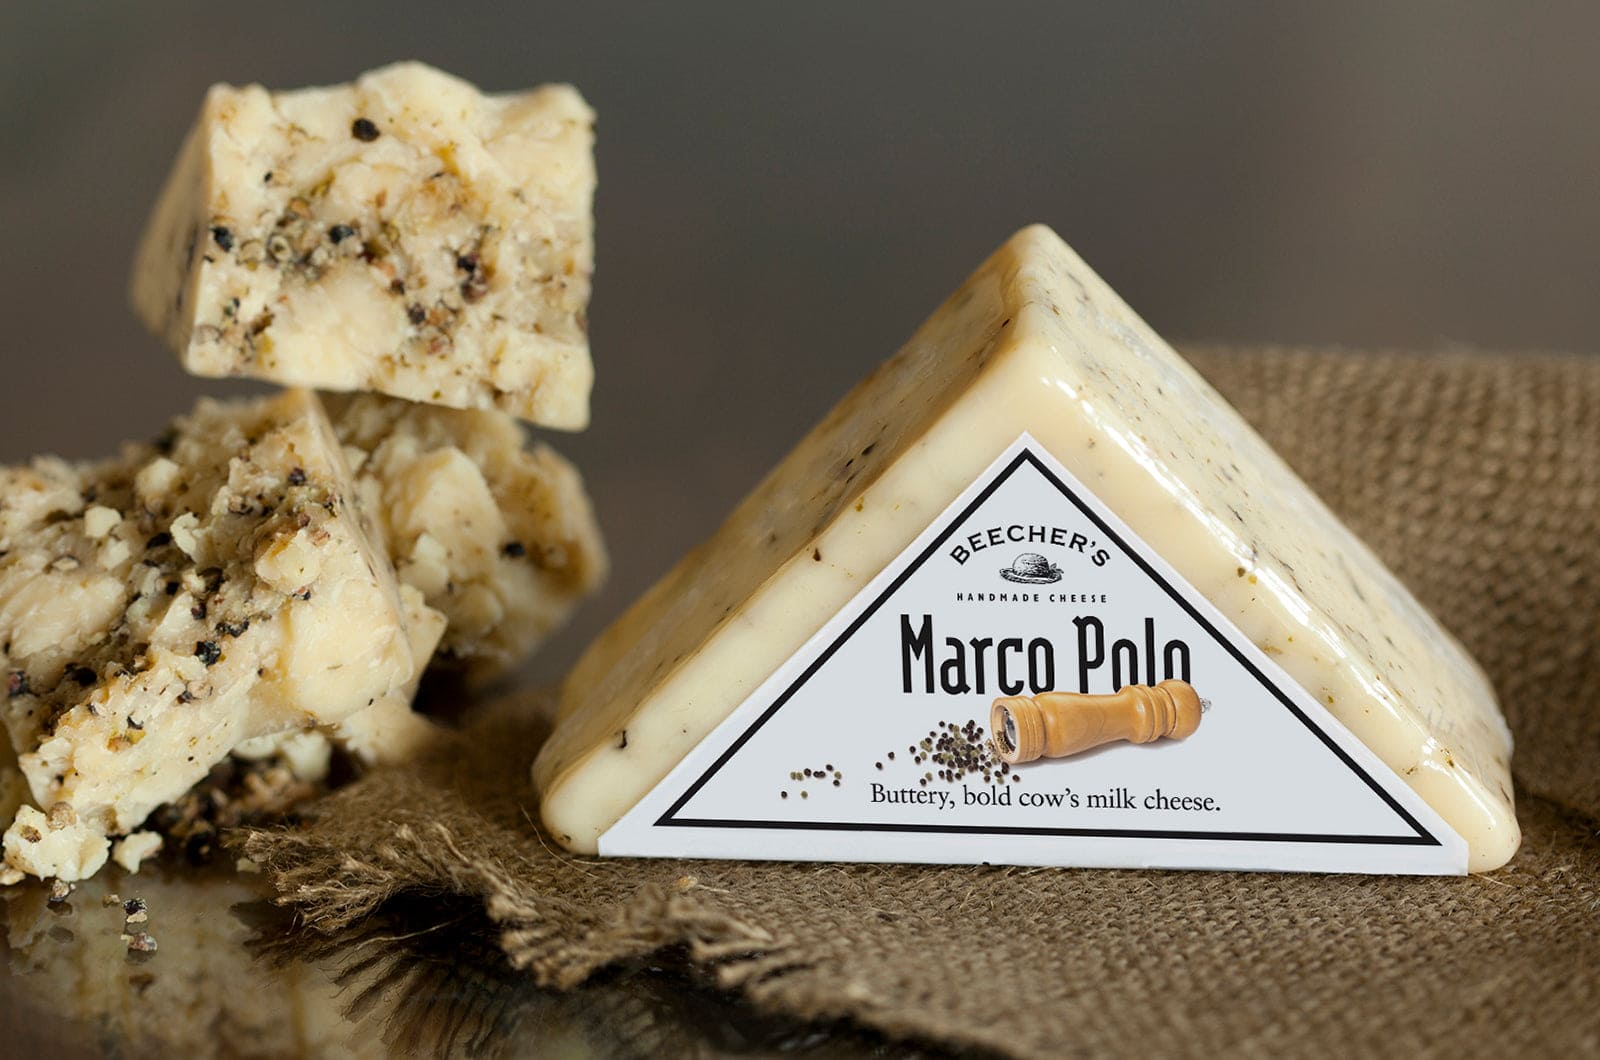 Marco Polo cheese beauty shot with packaging